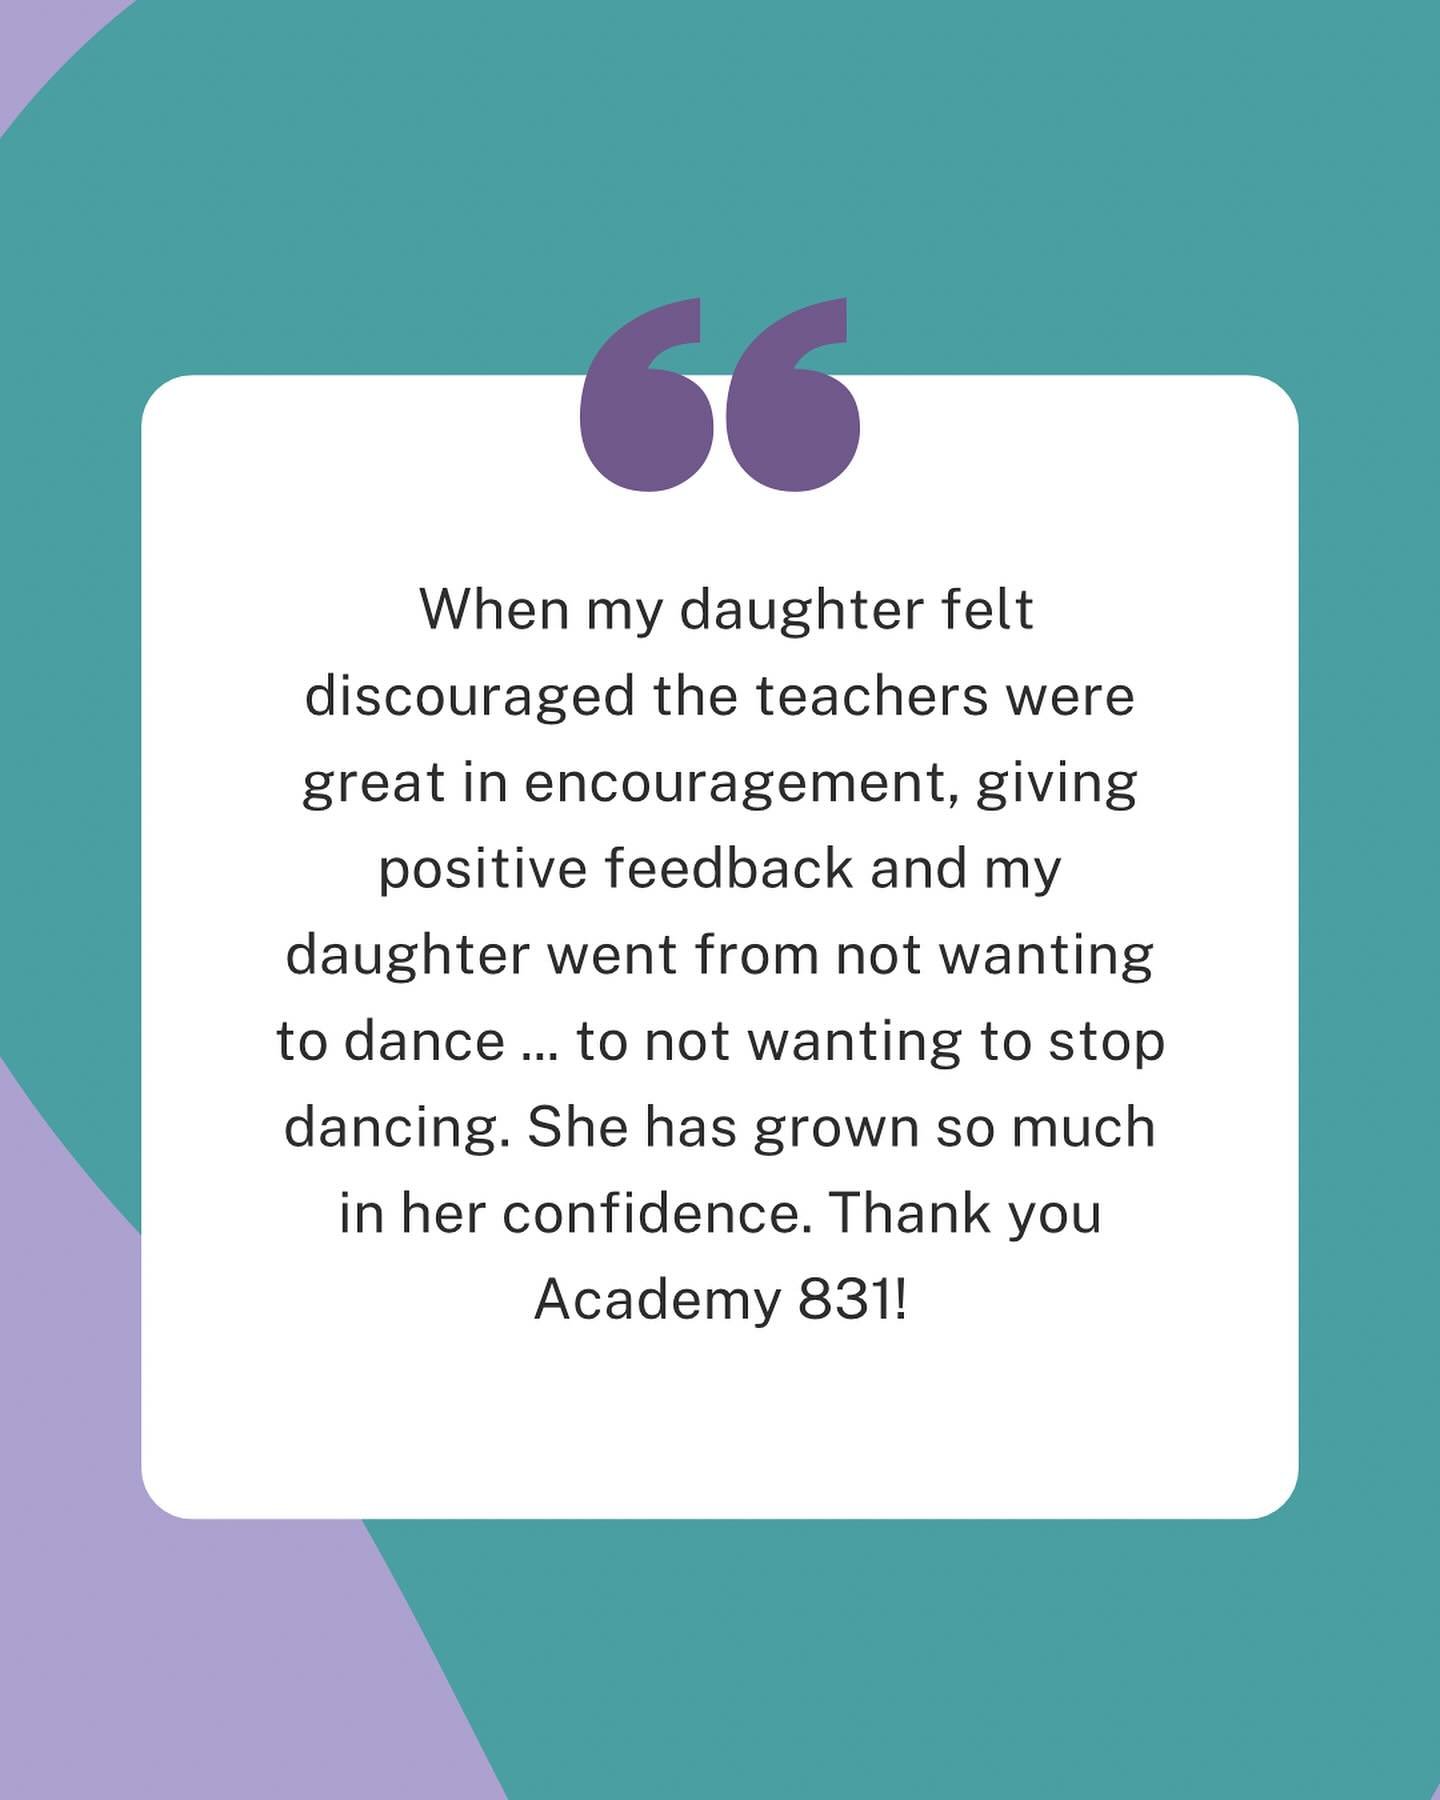 Sharing the love from our dance family 💖

We&rsquo;re grateful for each testimonial that brightens our day and reminds us why we do what we do.

Thank you for being part of our journey!

#dancer #danceworld #danceculture #orangecountydance #ocdance 